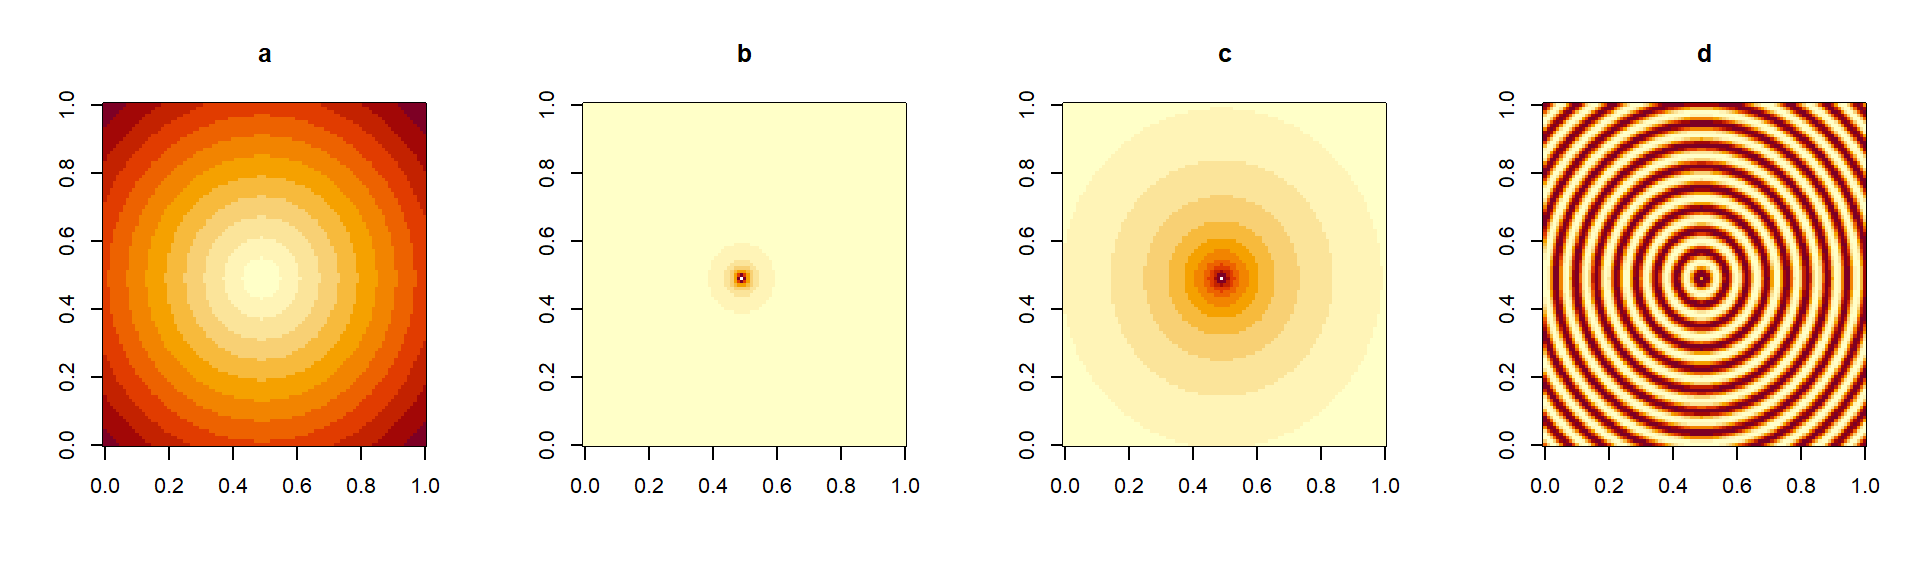 Simple transformations of a square distance matrix. In (a), the untransformed distances from the center (large values in dark, small values in light colors). In (b), the inverse distance (\(1/d\)), tending to zero away from the center. In (c) \(1/d^{0.01}\), presenting a slower decay away from the center. In (d), a periodic function of distance (\(sin(d)\)) producing a ripple effect.